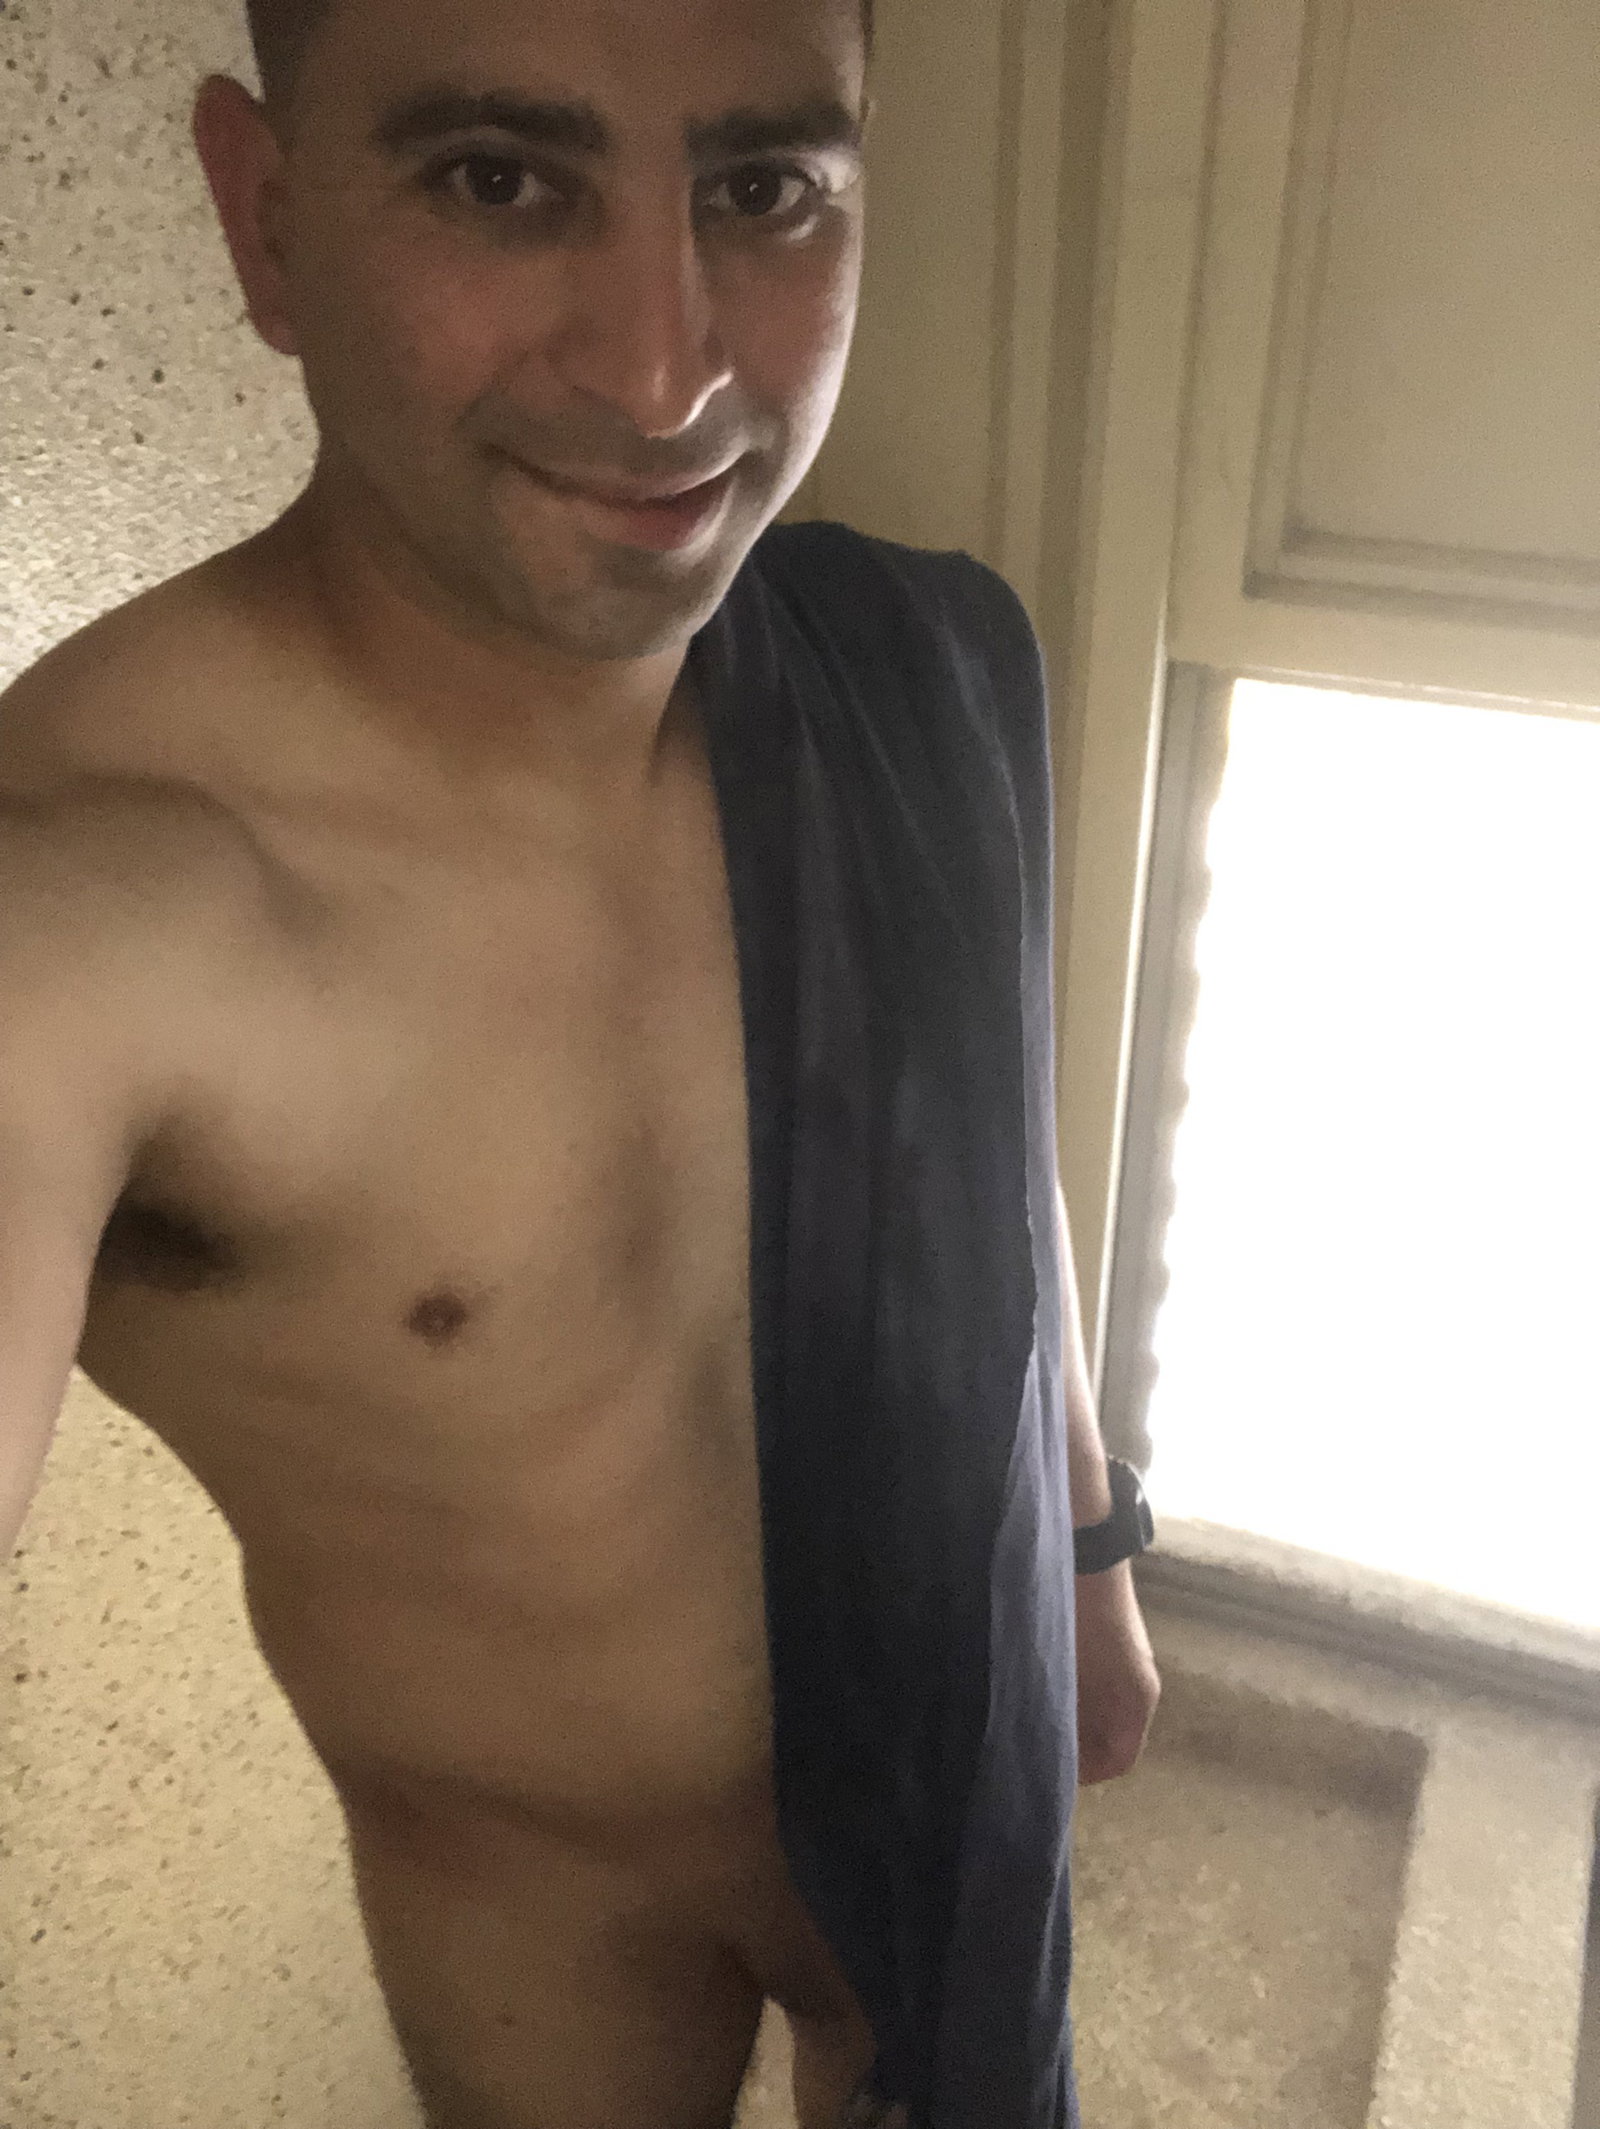 Photo by Floatingshadow with the username @Floatingshadow, who is a verified user,  September 12, 2019 at 5:14 PM. The post is about the topic Amateur and the text says 'getting ready to shower who is joining me?'